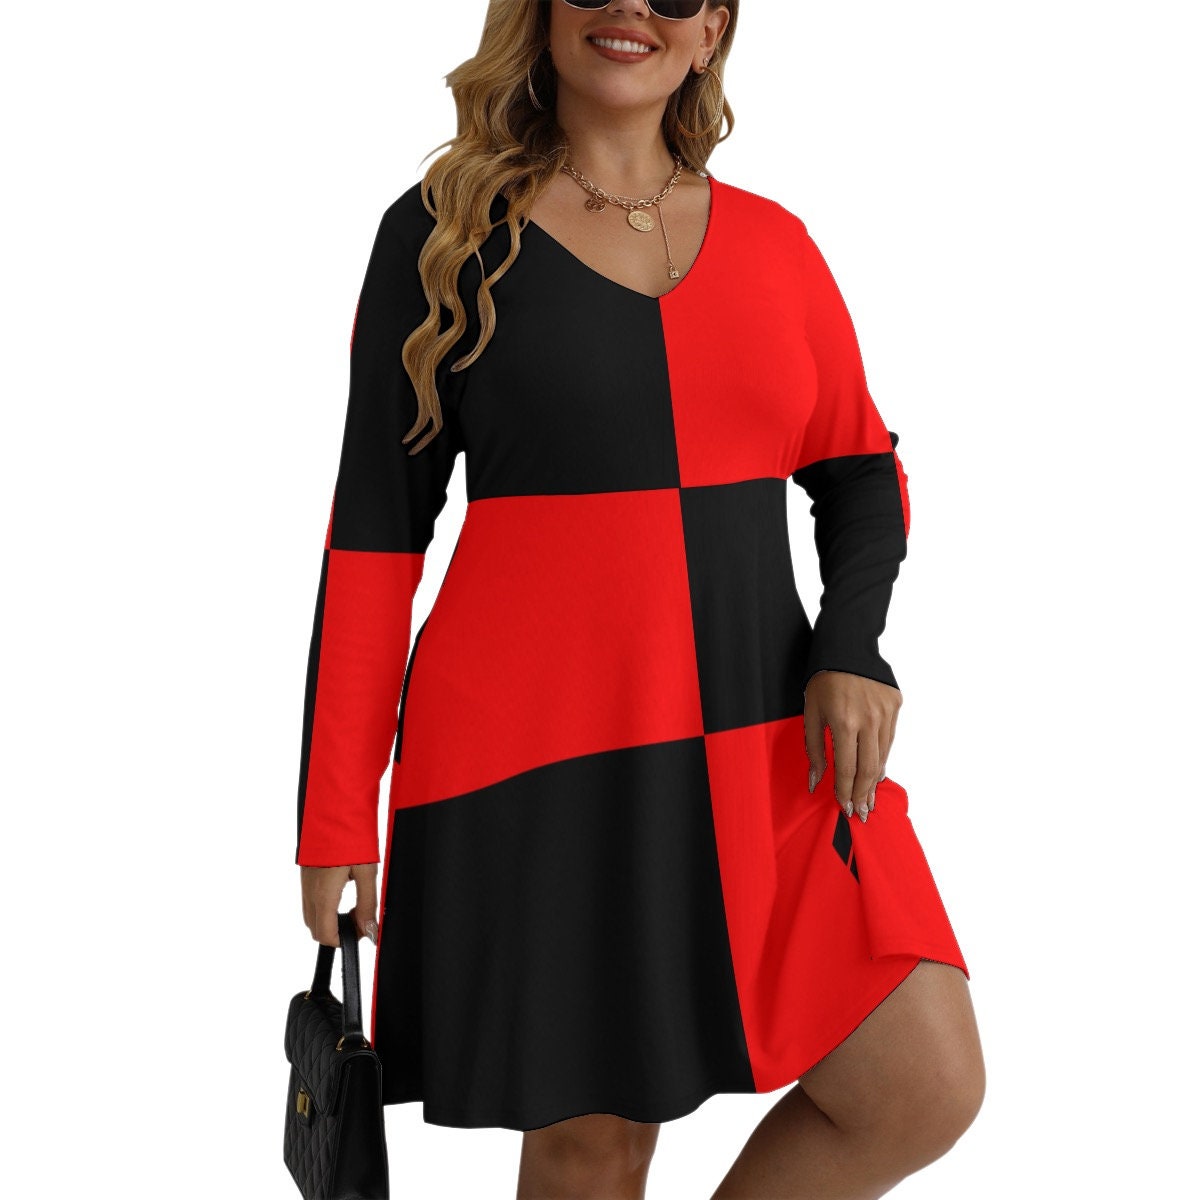 Queen of Diamonds Plus Size Harlequin Women's V-neck Long Sleeve Dress (Plus Size), Cosplay Dress, Halloween dress, Sexy BBW, Gift for Her